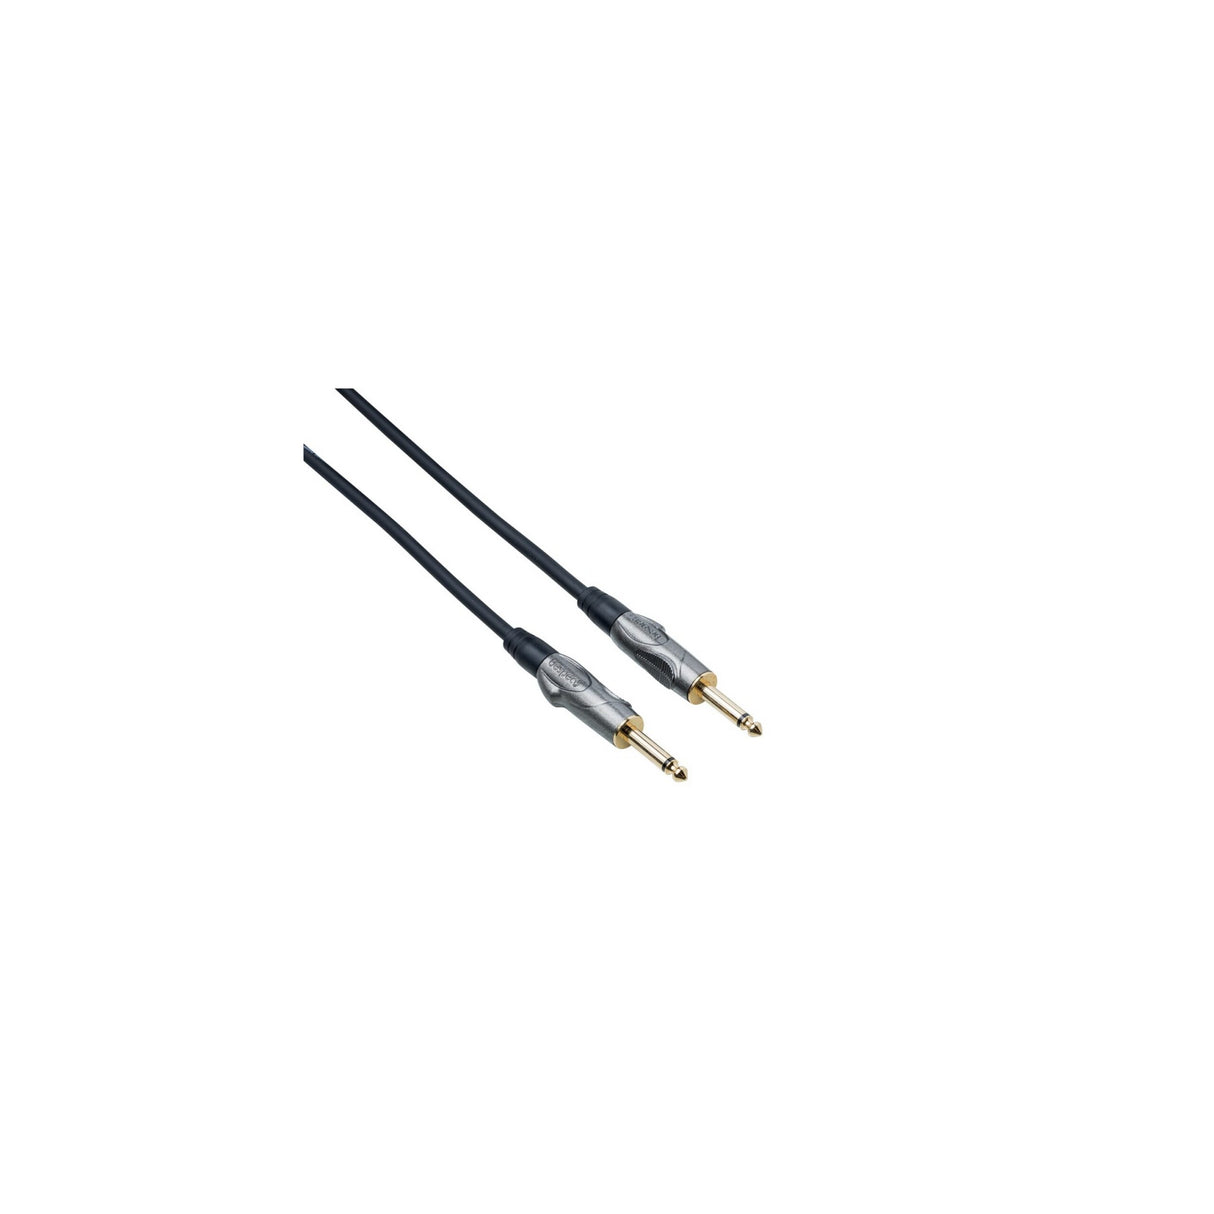 Bespeco TT50 Titanium Series Straight Angle 1/4 Inch to 1/4 Inch Guitar Cable, 1.5 Foot